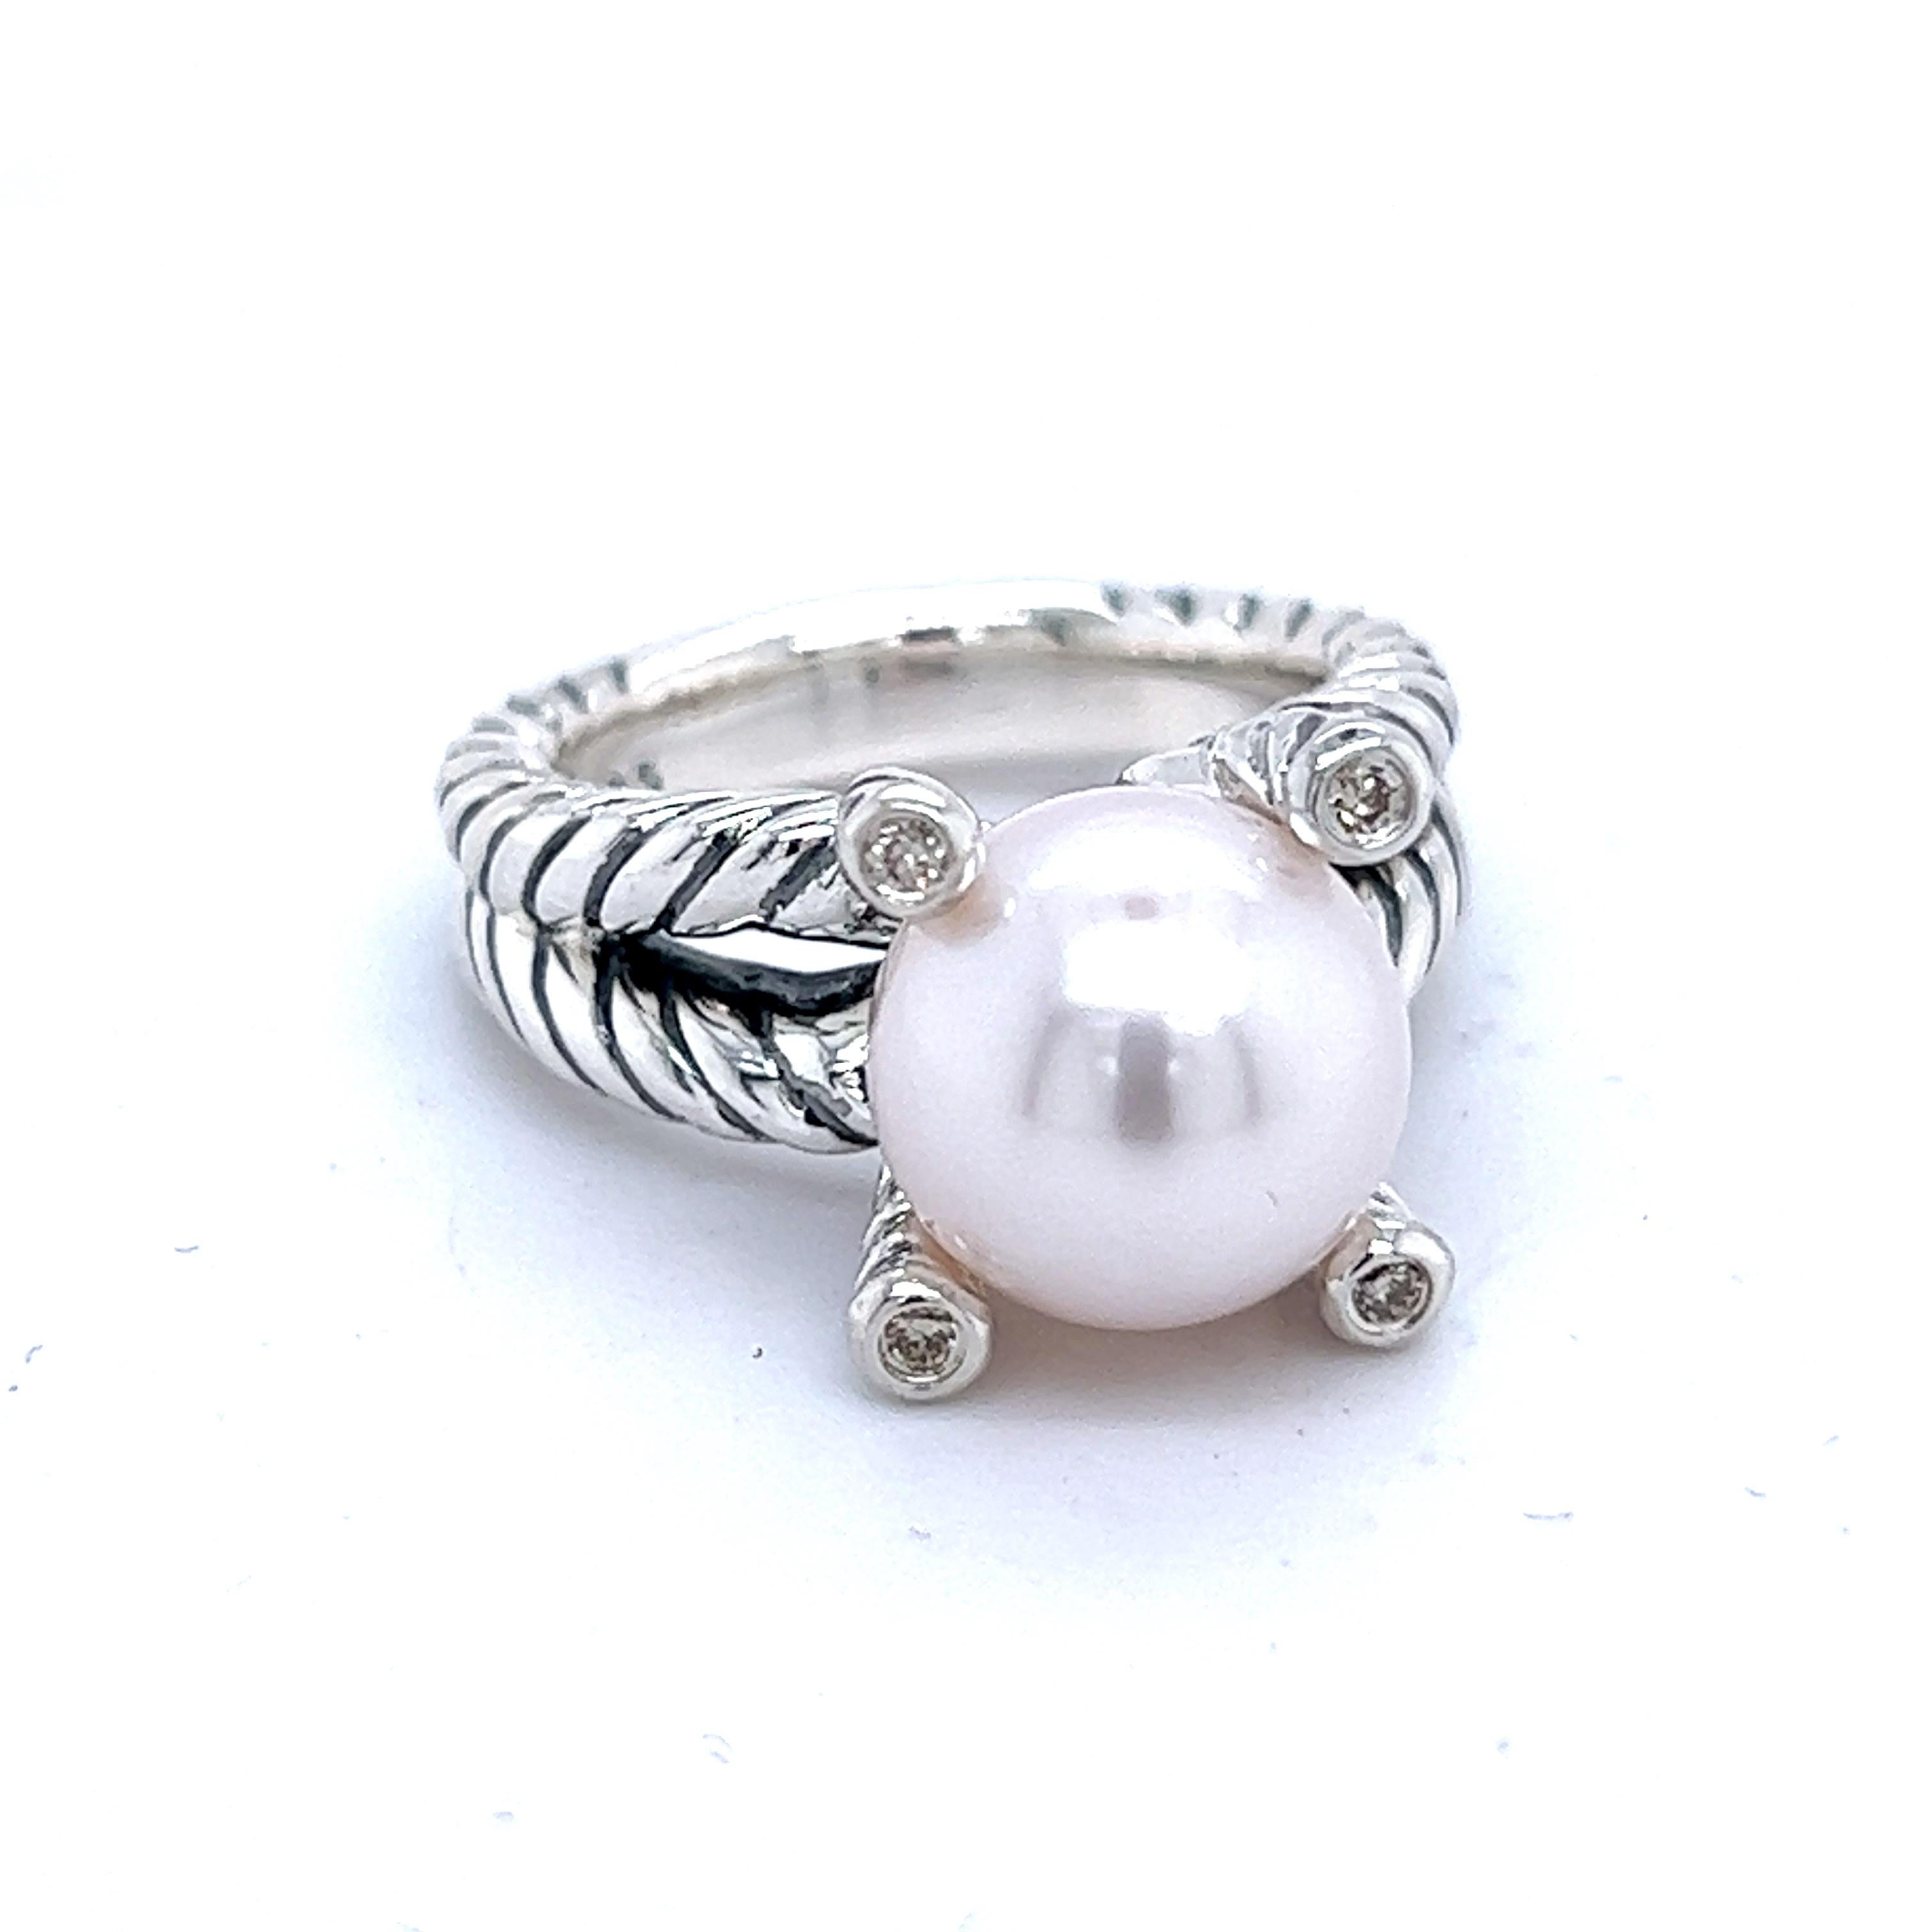 David Yurman Estate Pearl Diamond Cable Collectables Ring 5 Silver 0.05 CT DY174 1